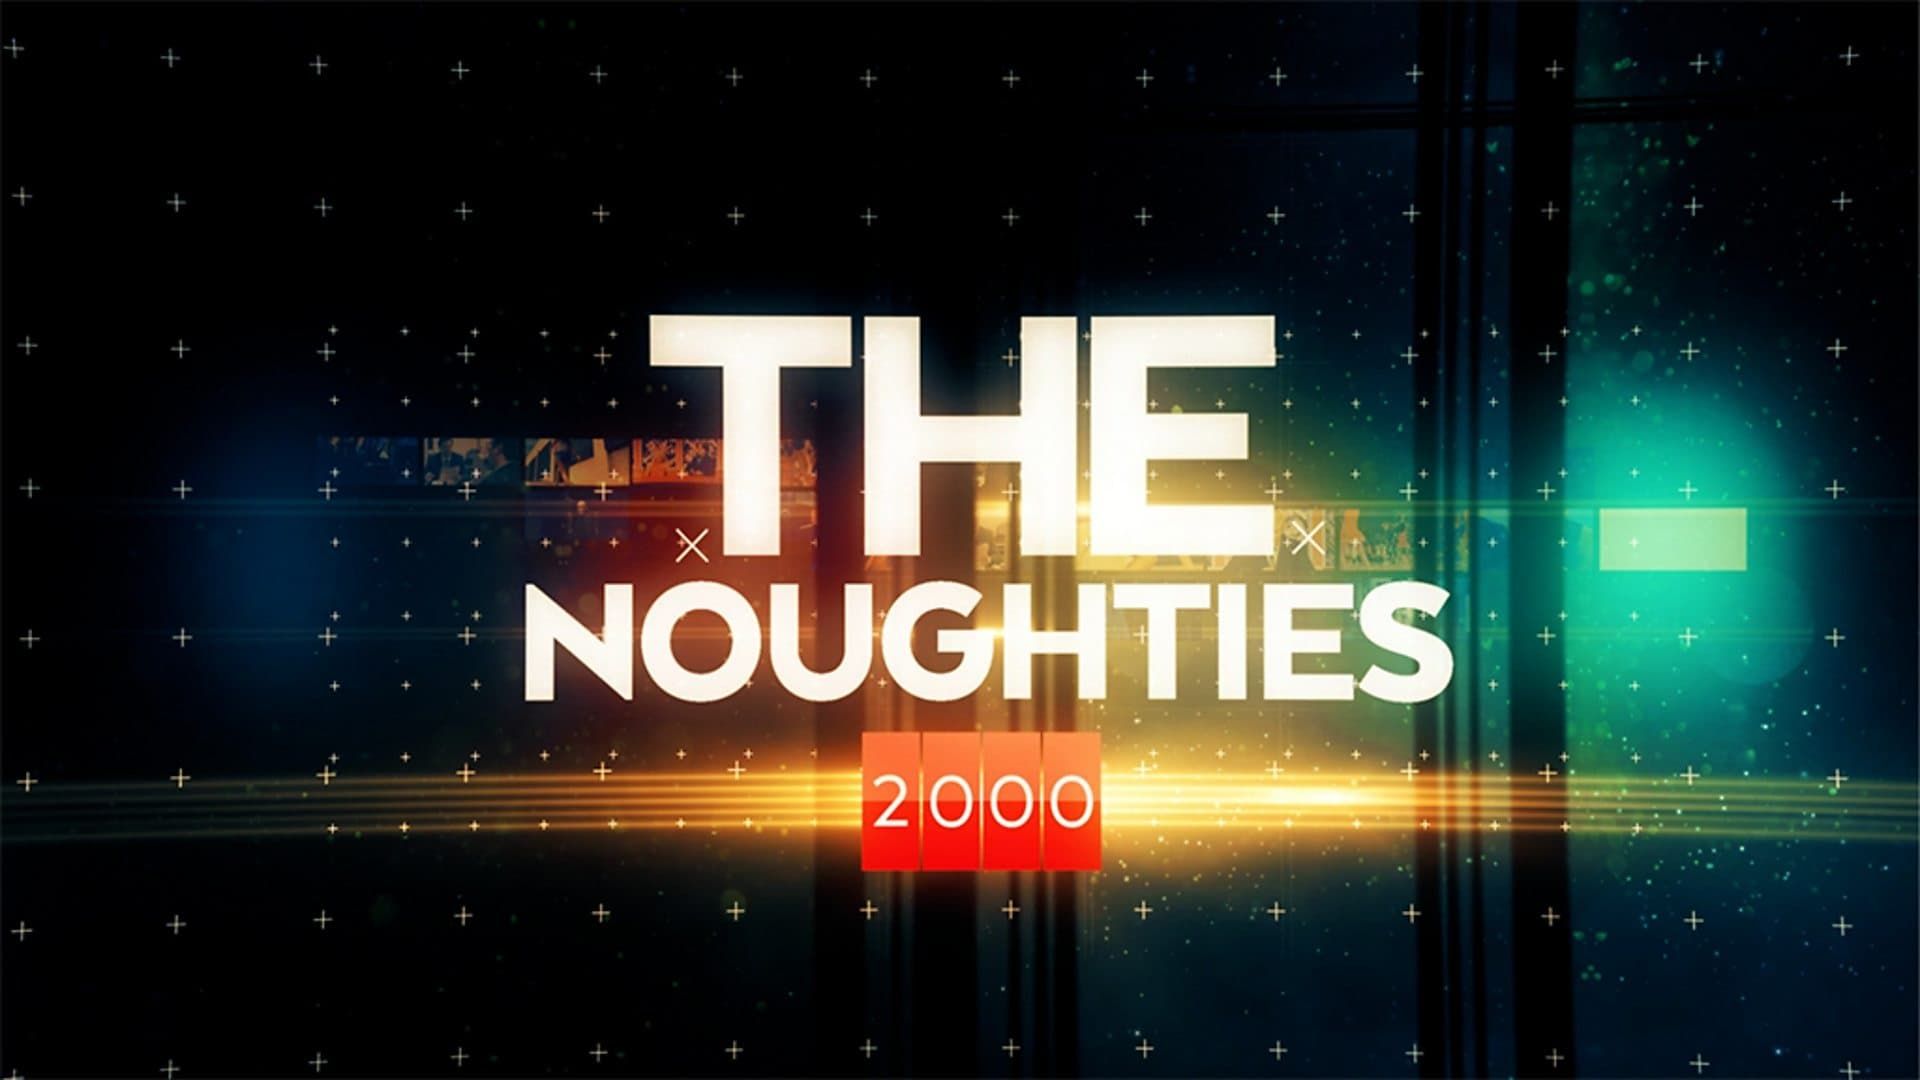 The Noughties background